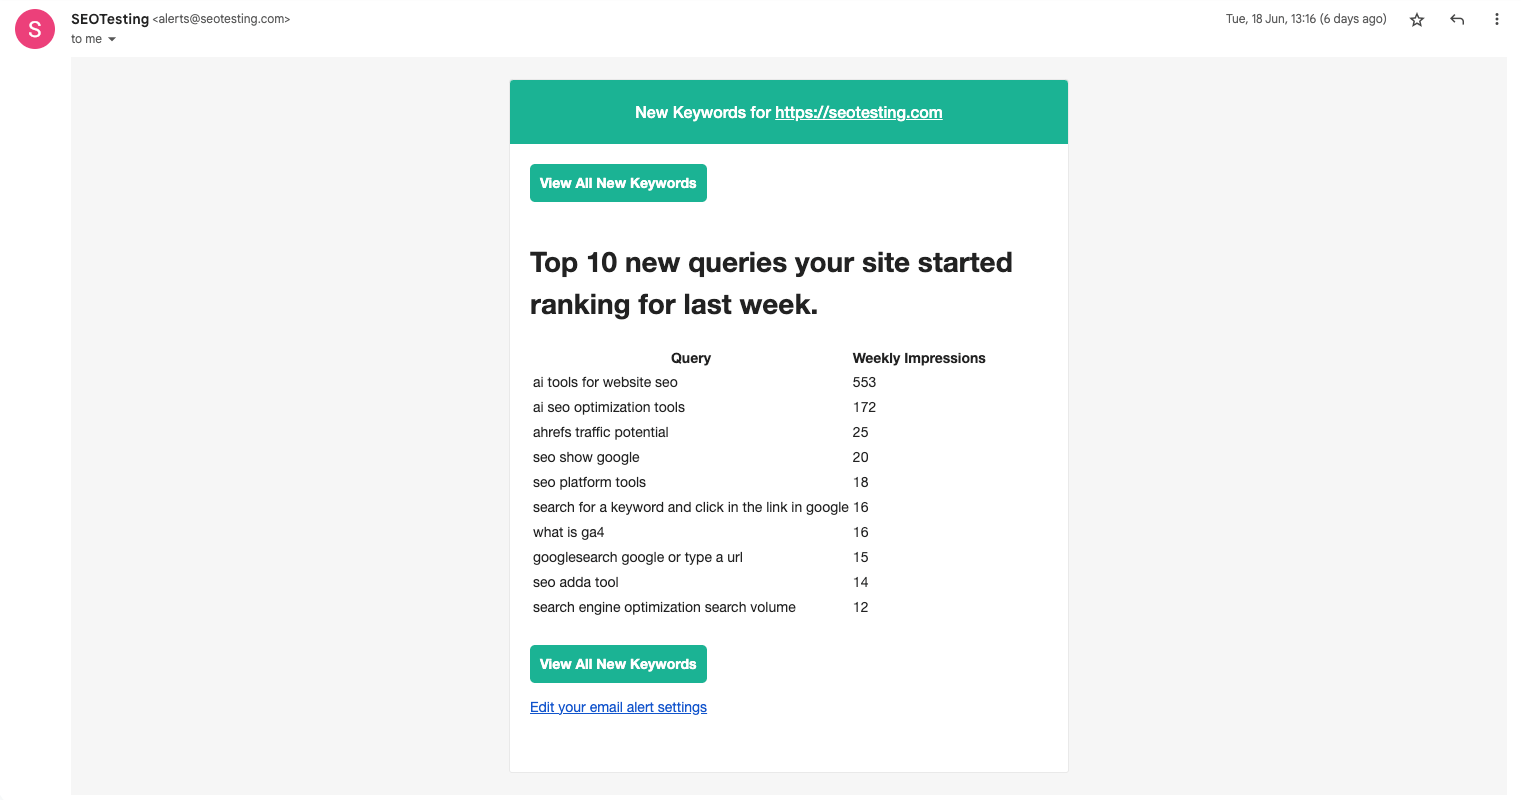 SEOTesting email alert showing top 10 new queries your site started ranking for last week. 